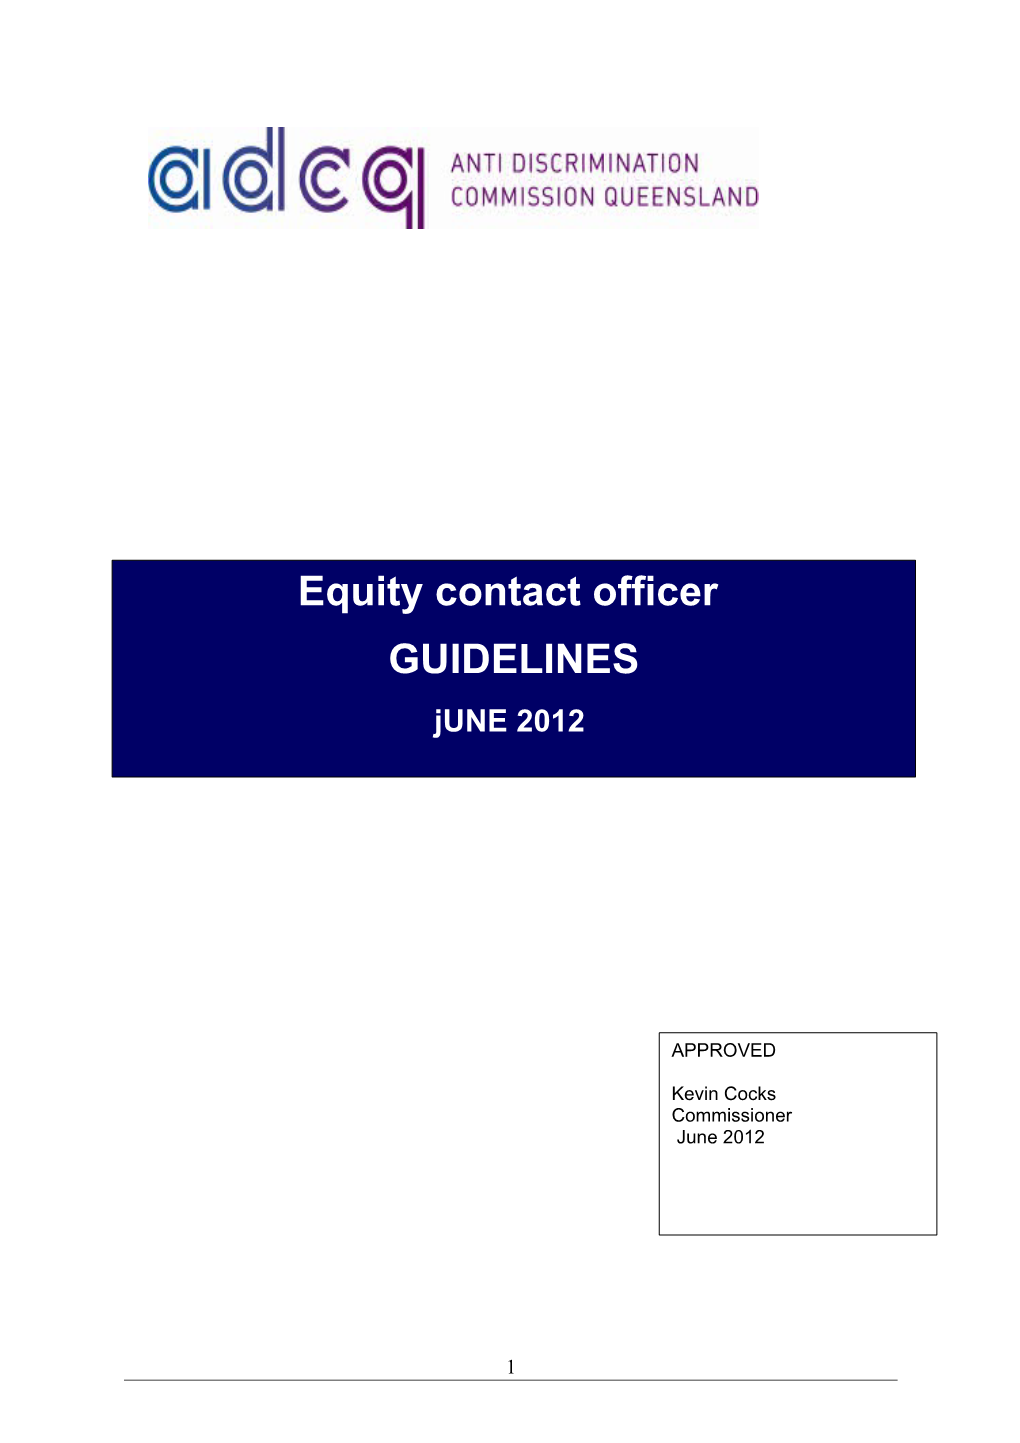 The Equity Contact Officer